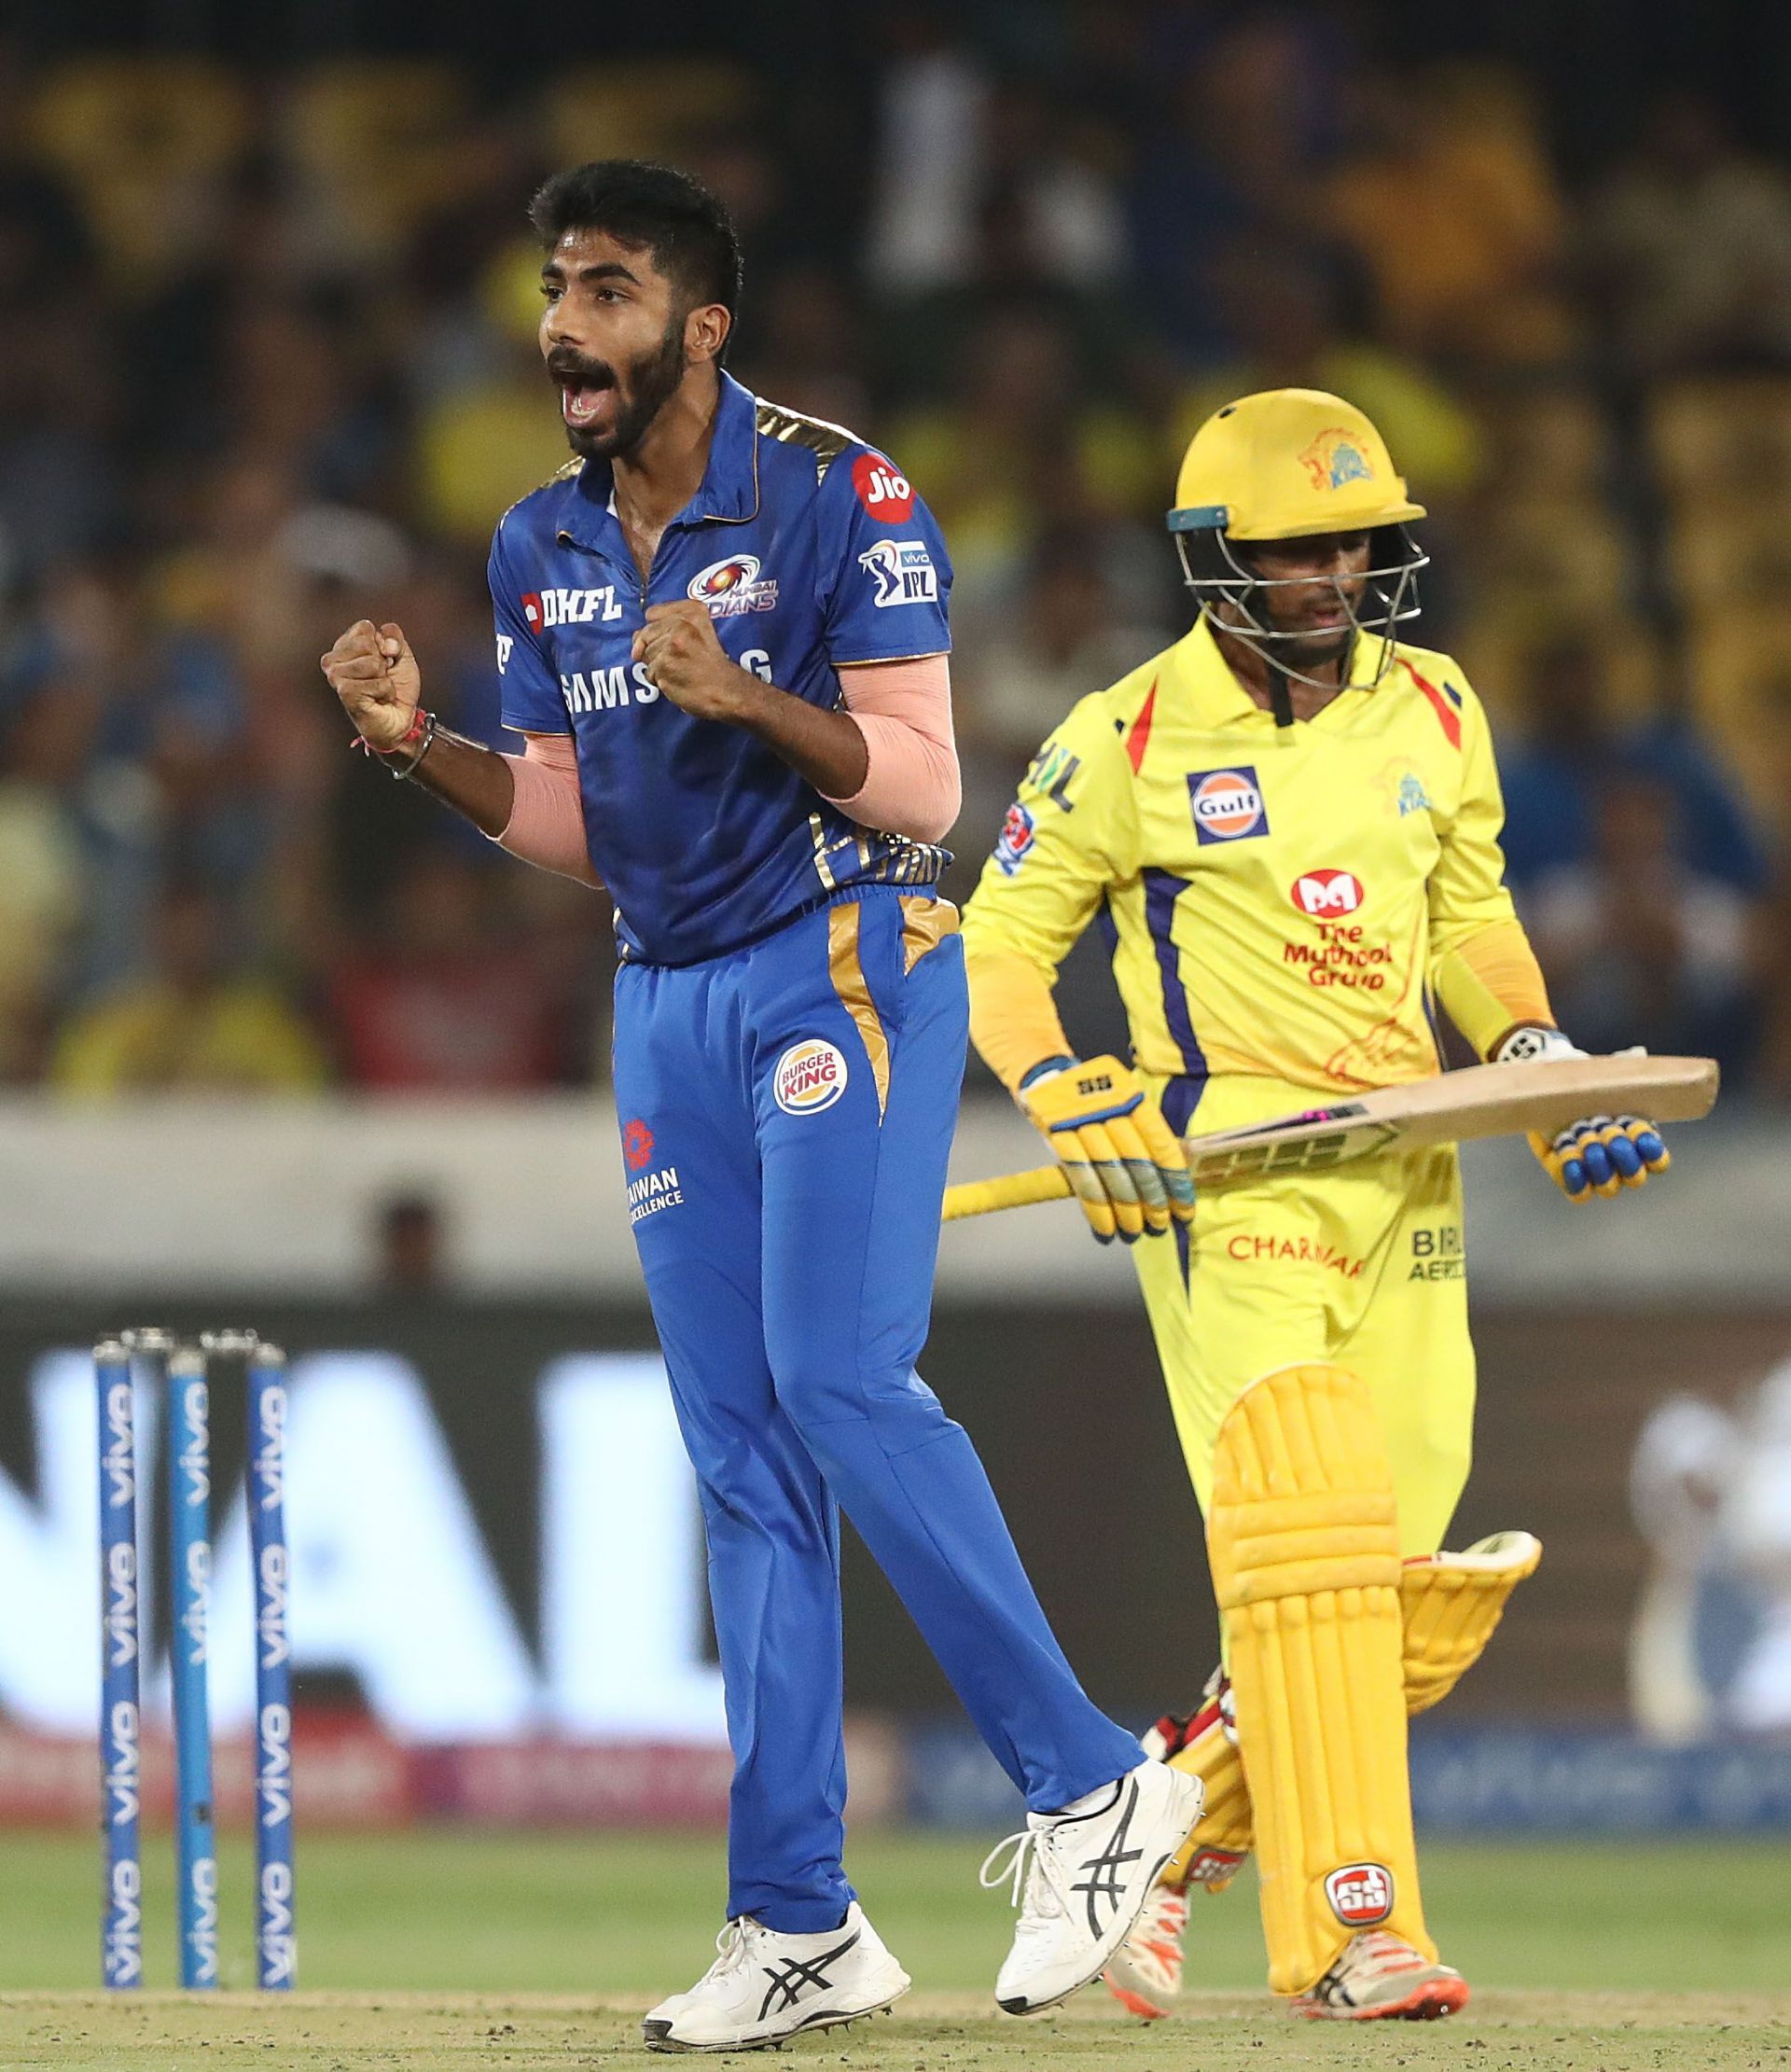 Bumrah needs to find his best form for MI to succeed